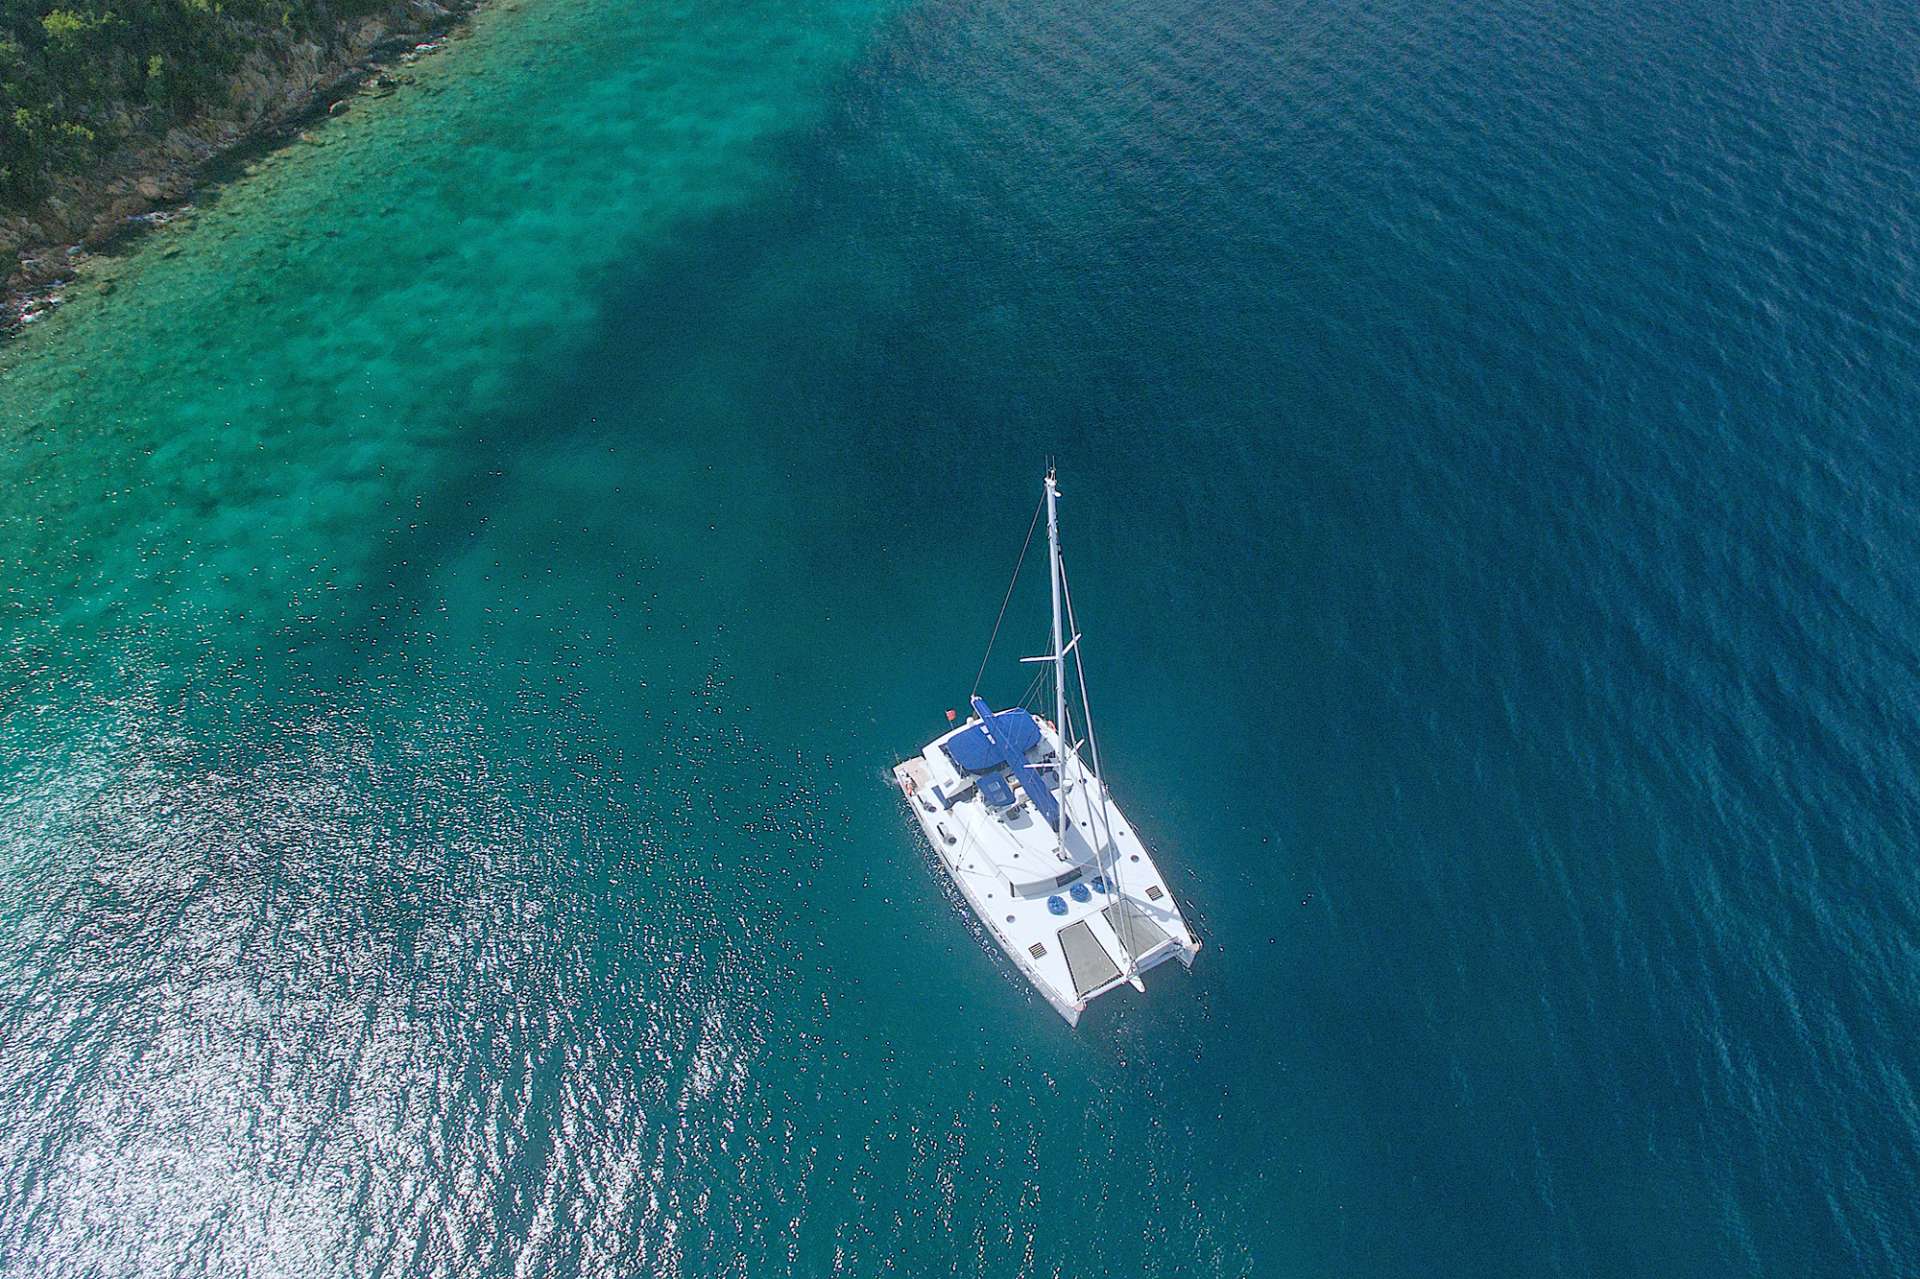 Catamaran Yacht 'NENNE' End of a Perfect Day on Nenne!, 10 PAX, 3 Crew, 67.00 Ft, 20.00 Meters, Built 2017, Fountaine Pajot, Refit Year The latest, 2020 electronics and equipment onboard. New larger tender June 2019